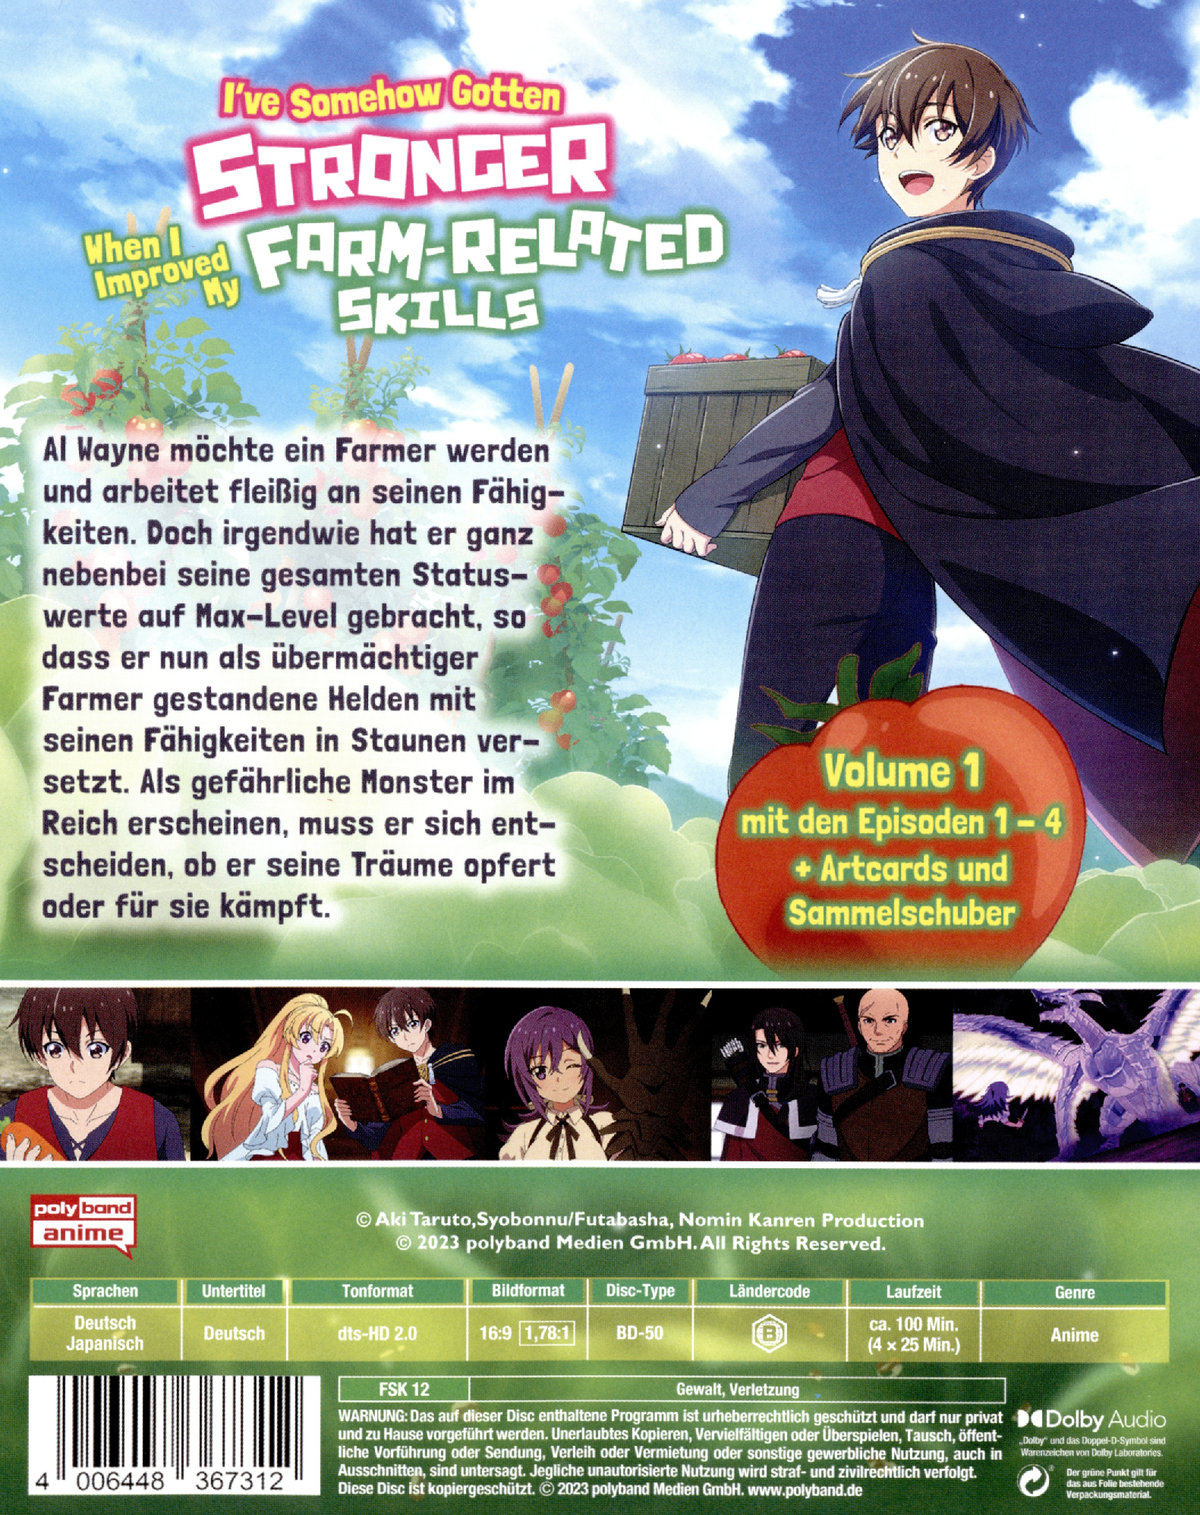 I’ve Somehow Gotten Stronger When I Improved My Farm-Related Skills - Volume 1  (Blu-ray Disc)